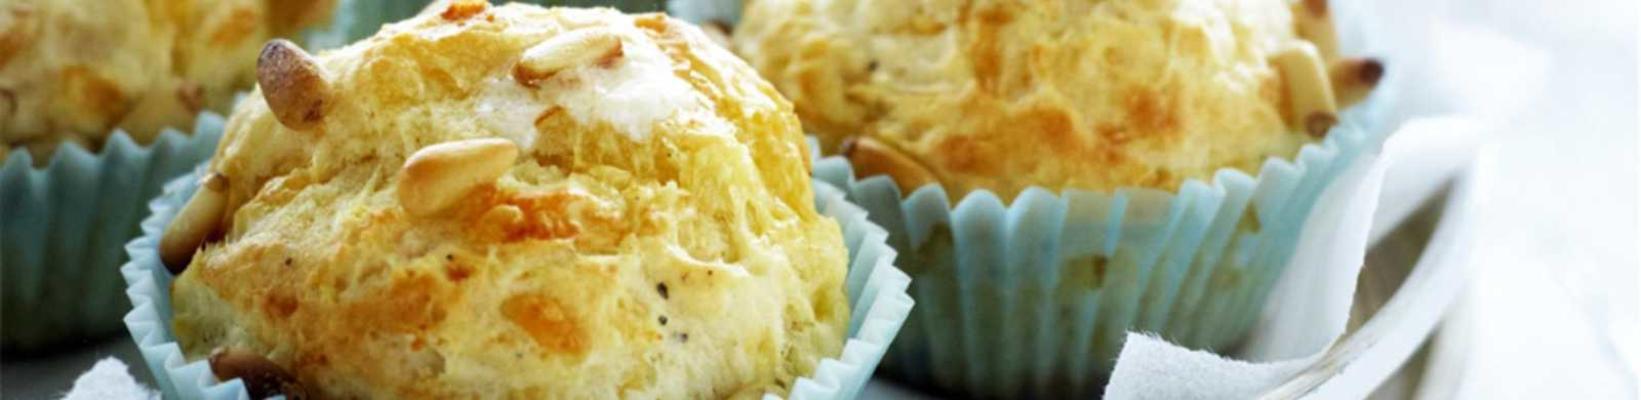 muffins with old cheese and pine nuts